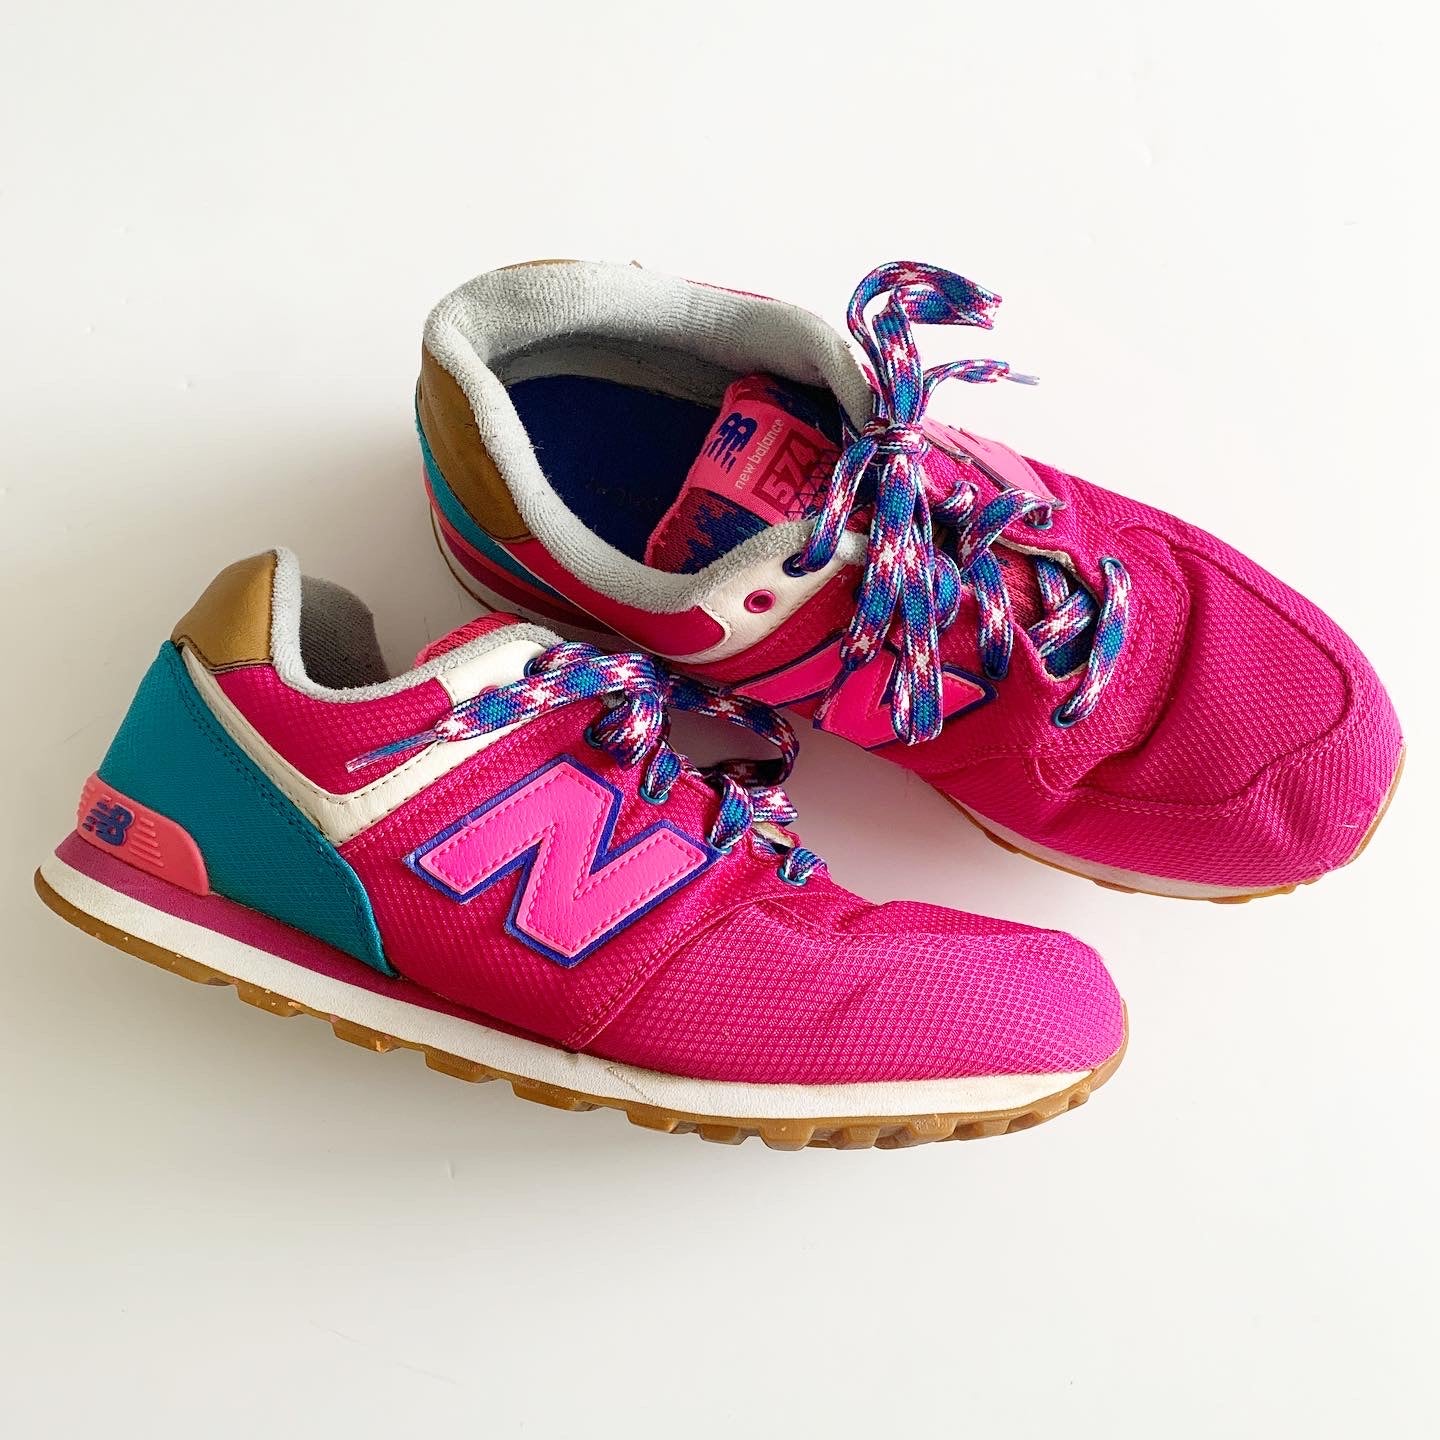 New Balance 574 Pink, Blue, White Sneakers, 7